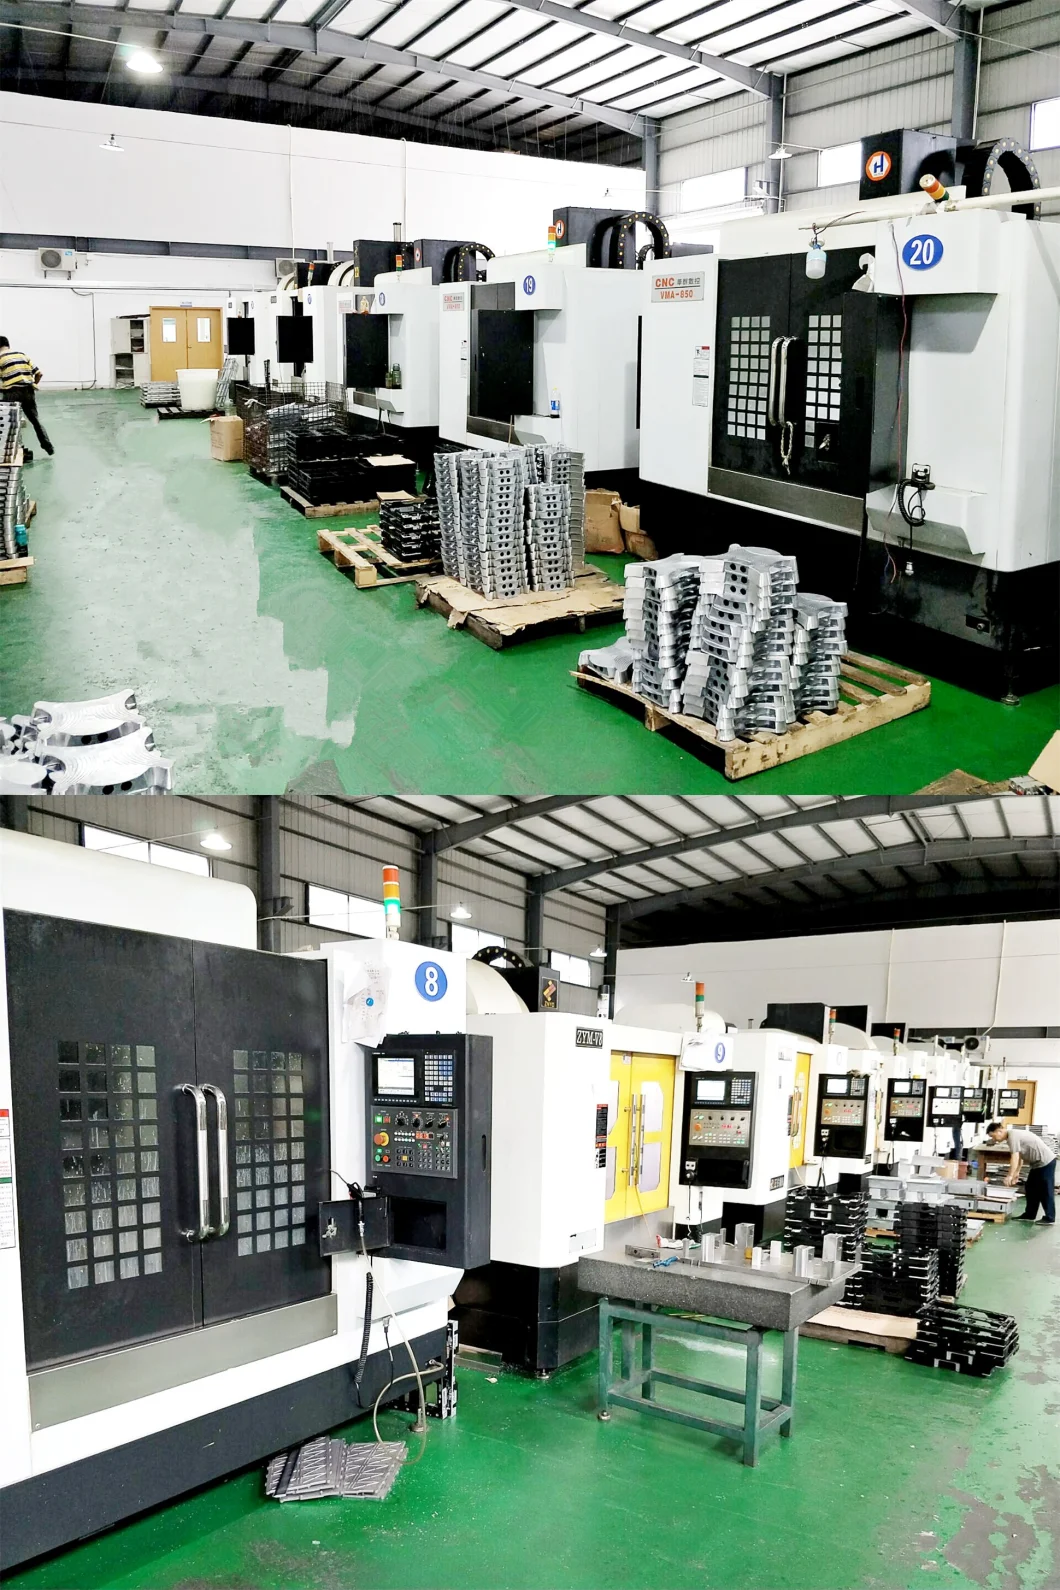 Die Casting Process Sample Provided by Aluminum Die Casting Company